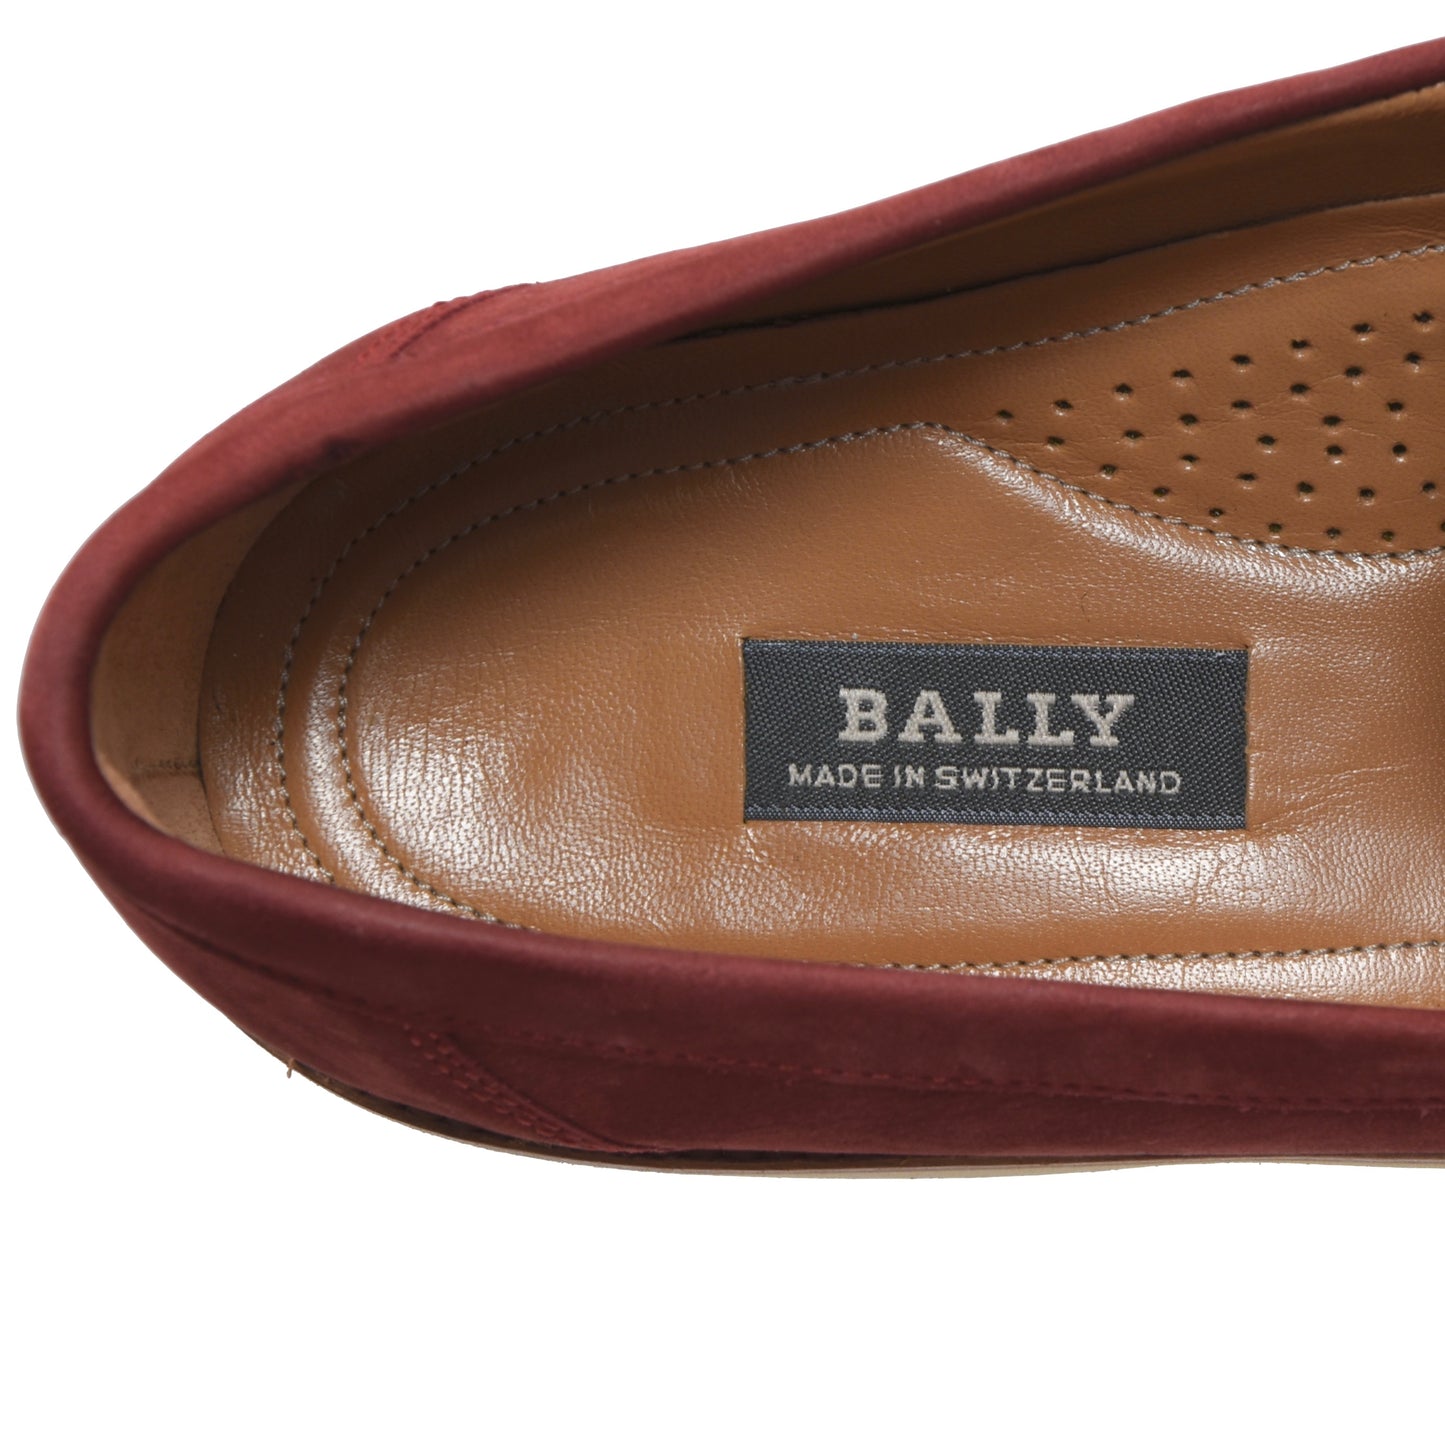 NOS Bally Suede Loafers Size 9E - Red